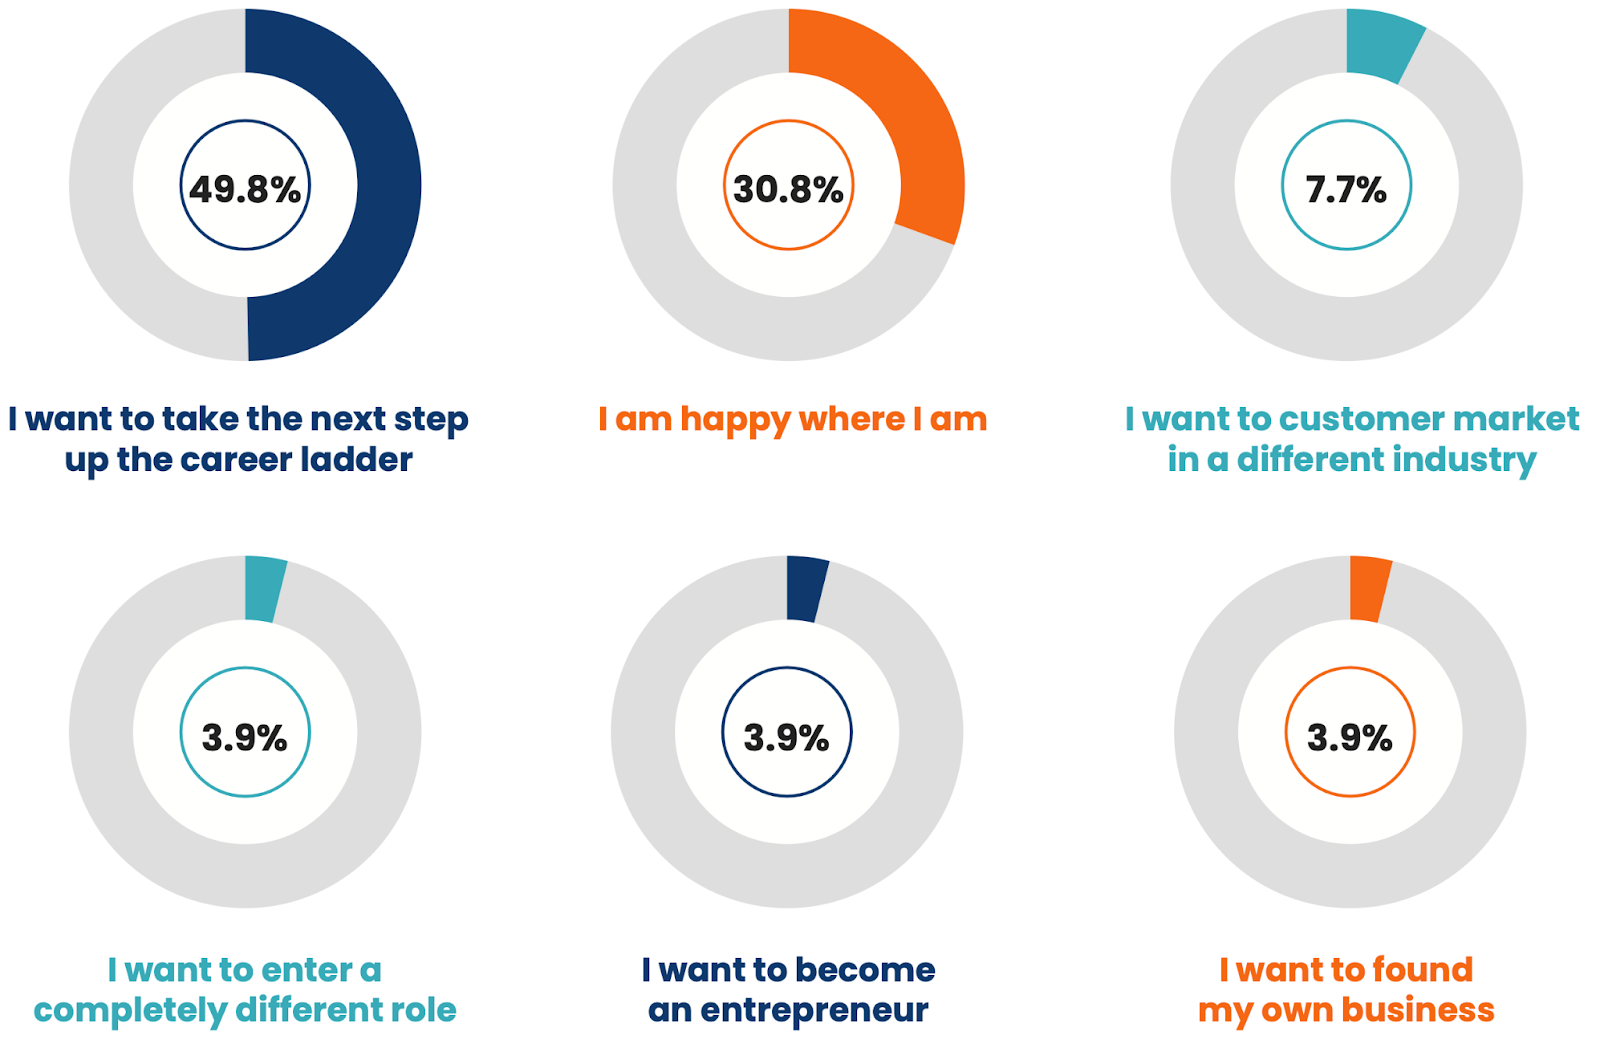 Graphic showing the percentage of responses for the question 'what are your career aspirations for the next year?'